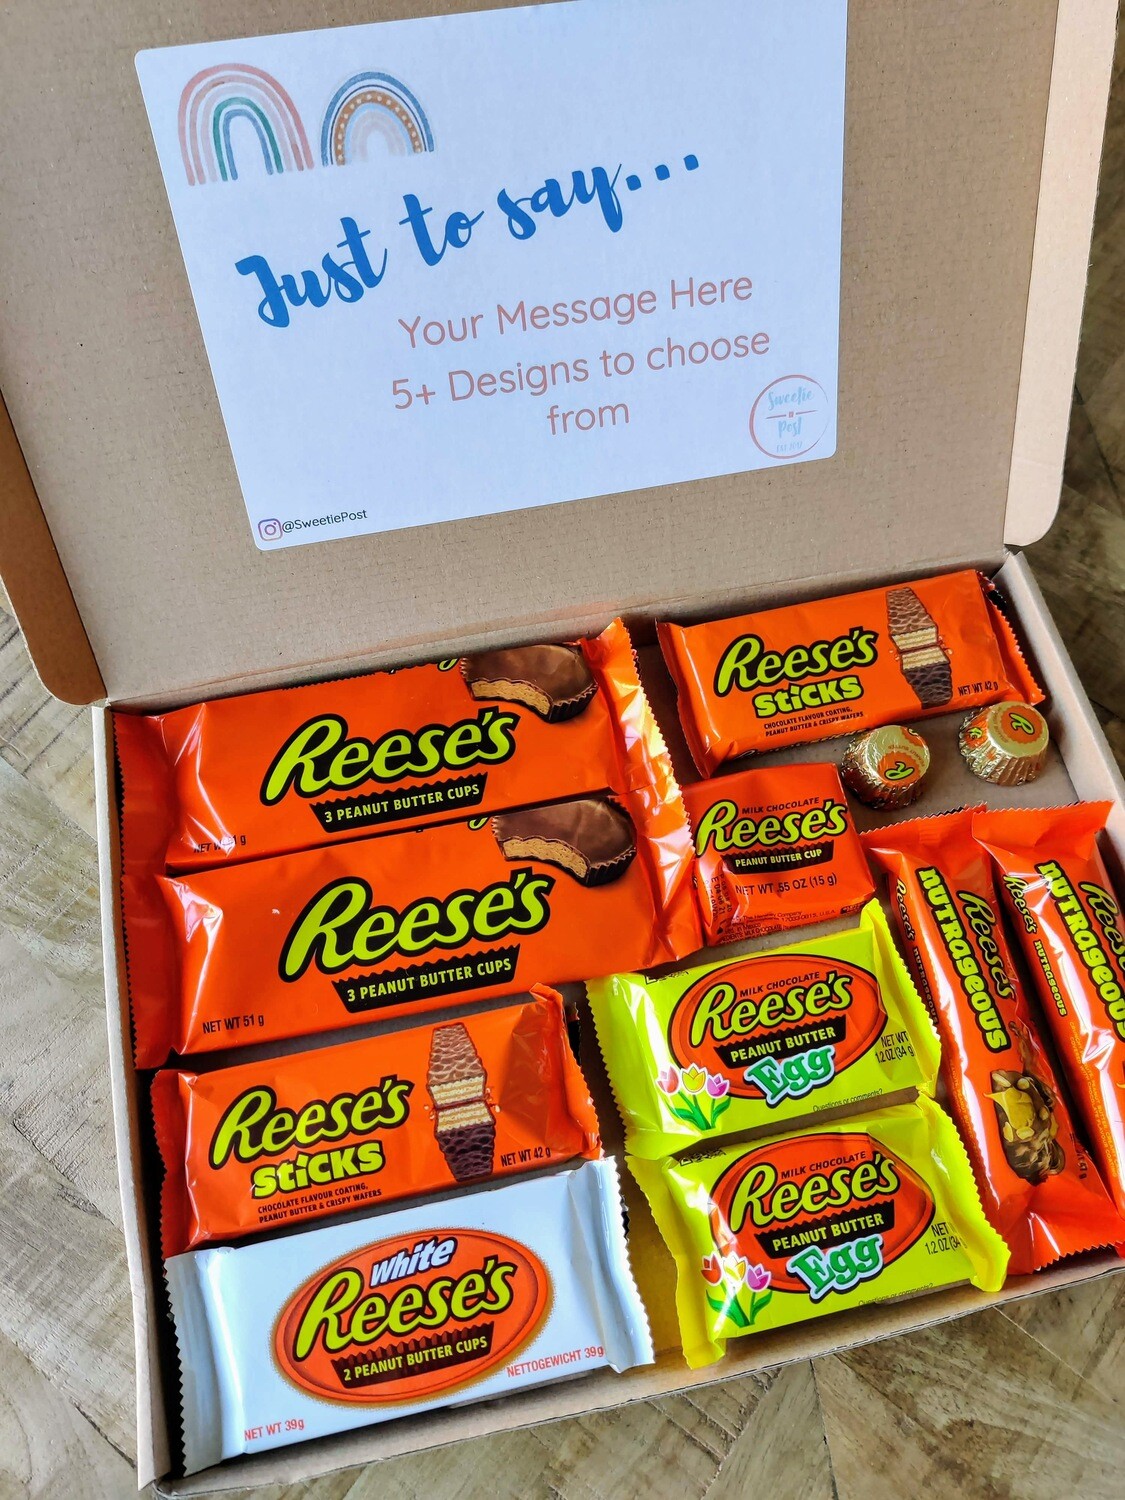 Large Reese's Easter Gift Box